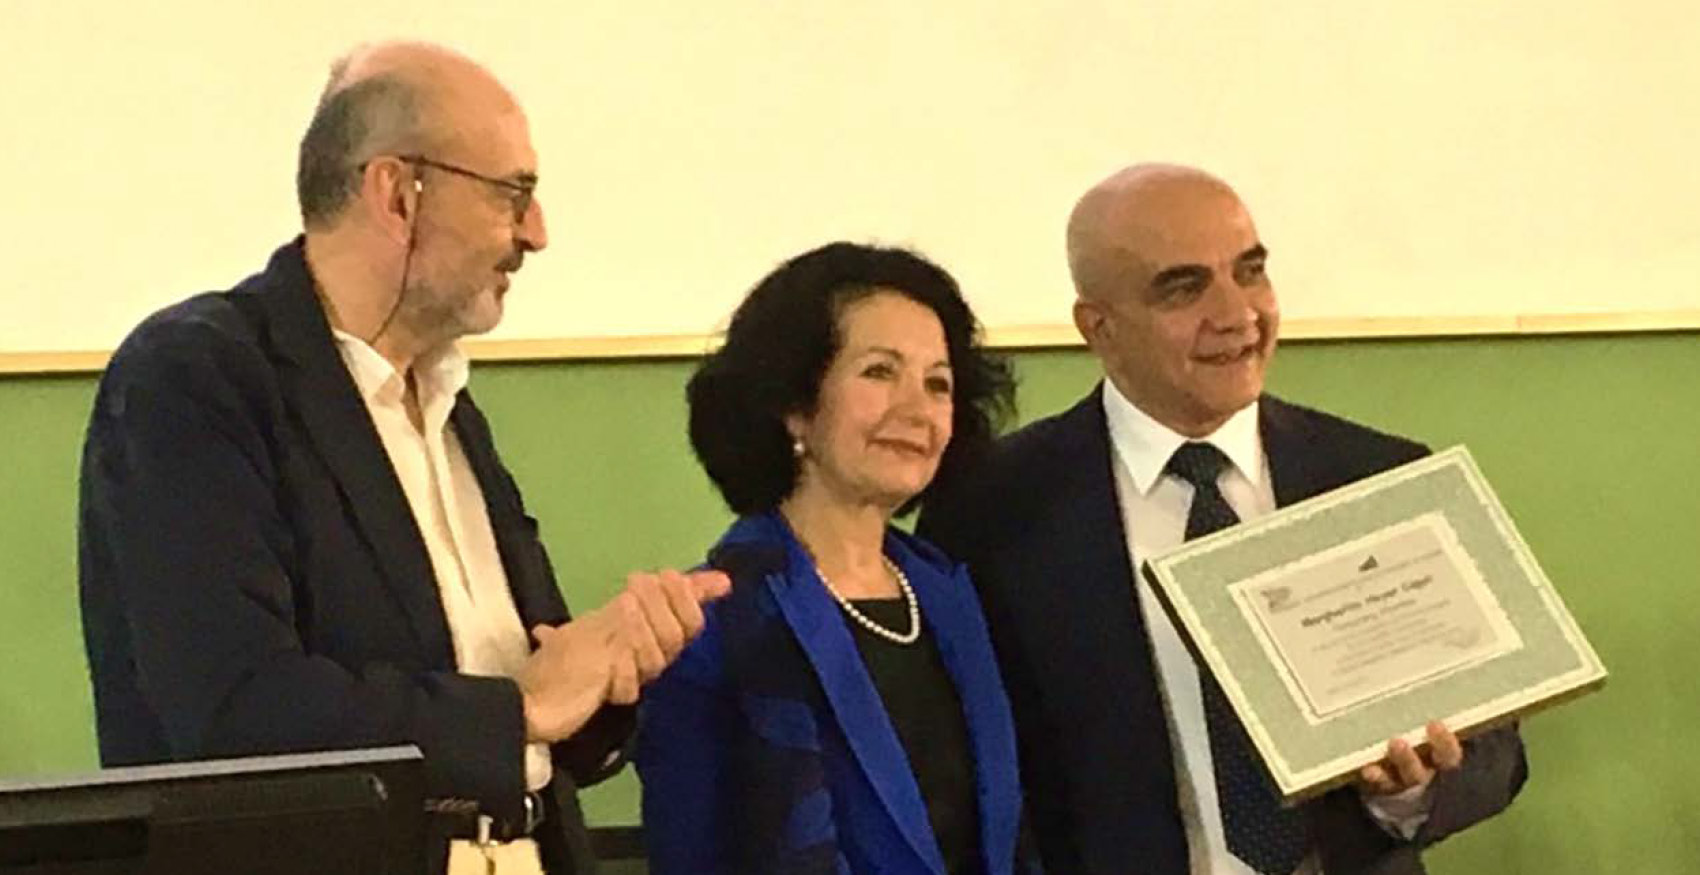 At this year's annual conference of the American Association of Teachers of Italian (AATI) held at the University of Cagliari in Cagliari, Italy, our own Professor Margherita Heyer-Caput was awarded with the AATI Honorary Membership. She was presented the membership plaque by Professor Salvatore Bancheri, Chair of the Department of Italian Studies at the University of Toronto and President Emeritus of the AATI. In announcing the honor, he read the text of the plaque: "The American Association of Teachers of Italian awards to Margherita Heyer-Caput Honorary Membership of the AATI for her indelible contribution to the field of Italian and, in particular, of Italian-American Studies in North America." Upon receiving the honor, Professor Heyer-Caput delivered the event's keynote address.